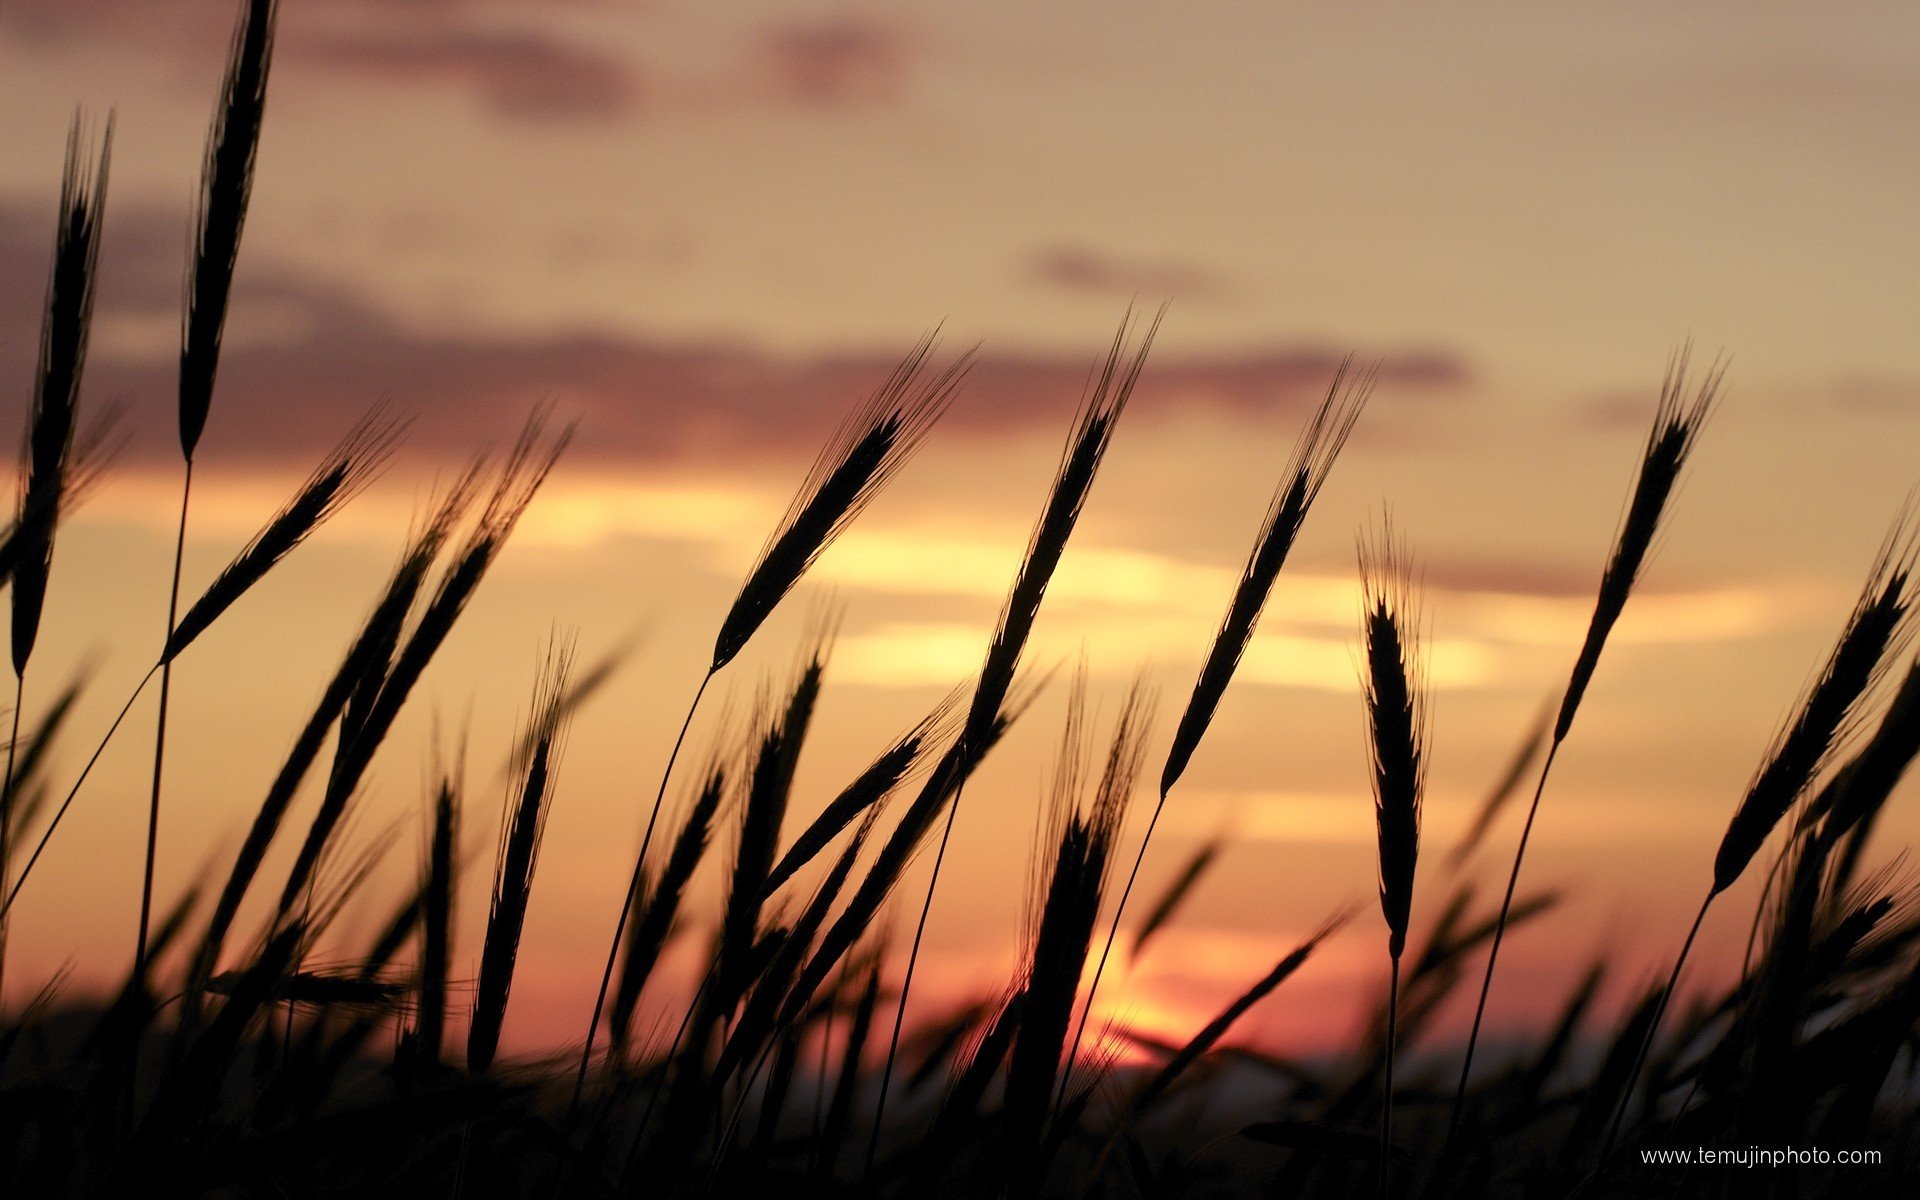 sunset, Nature, Silhouettes, Wheat, Portugal, Skyscapes Wallpaper